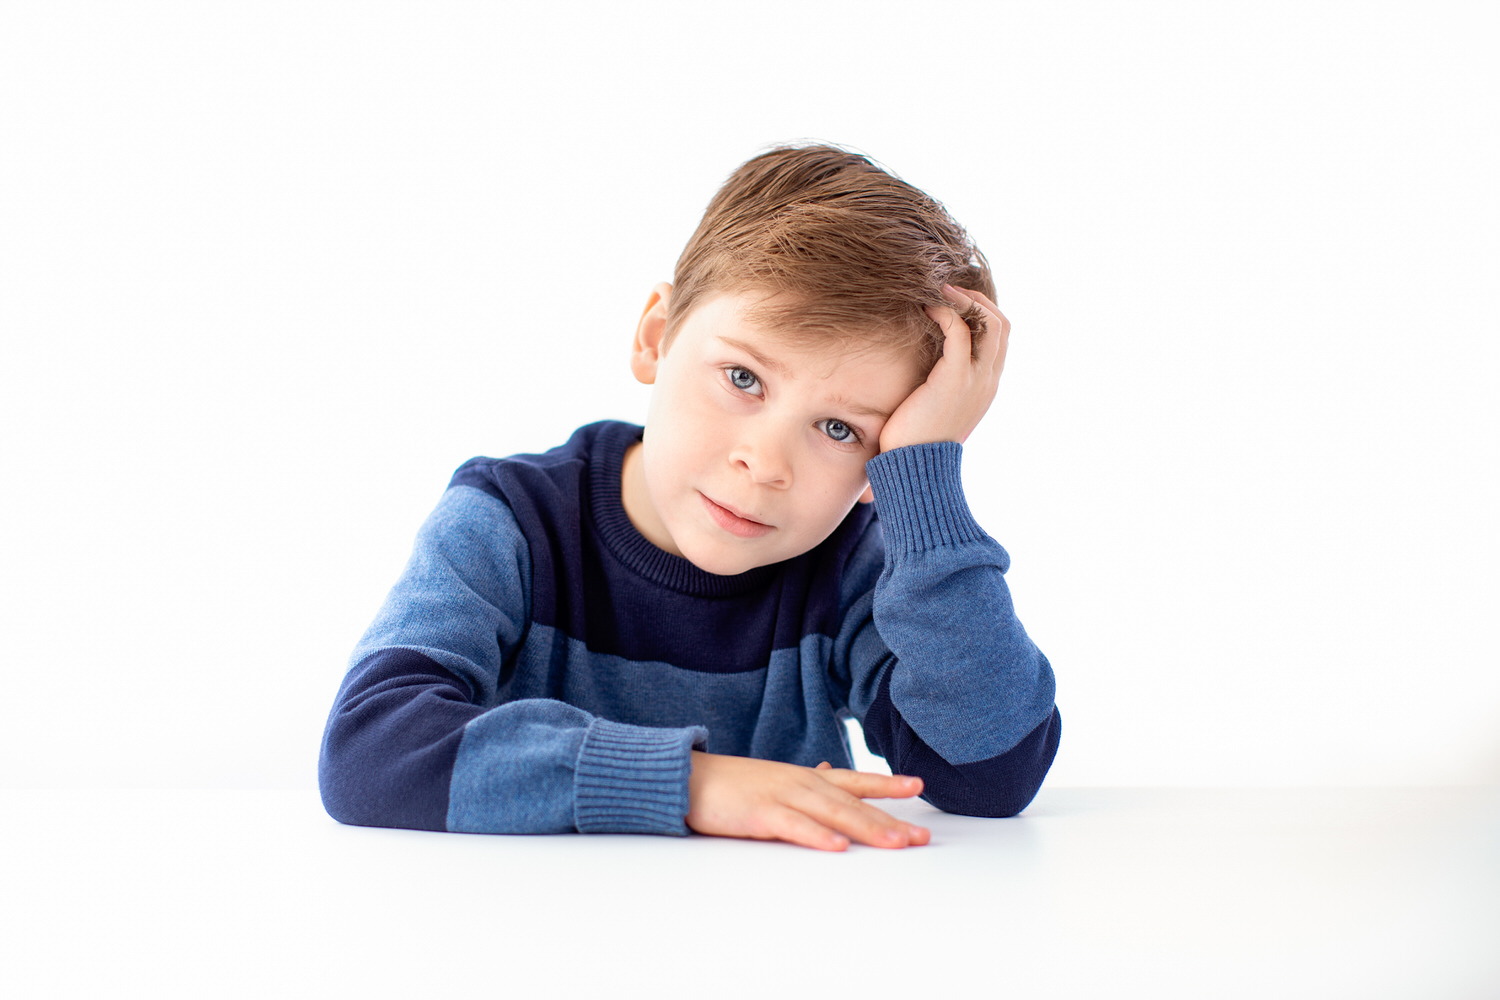 a young boy thinking as he looks directly into the camera during a portrait studio photo shoot